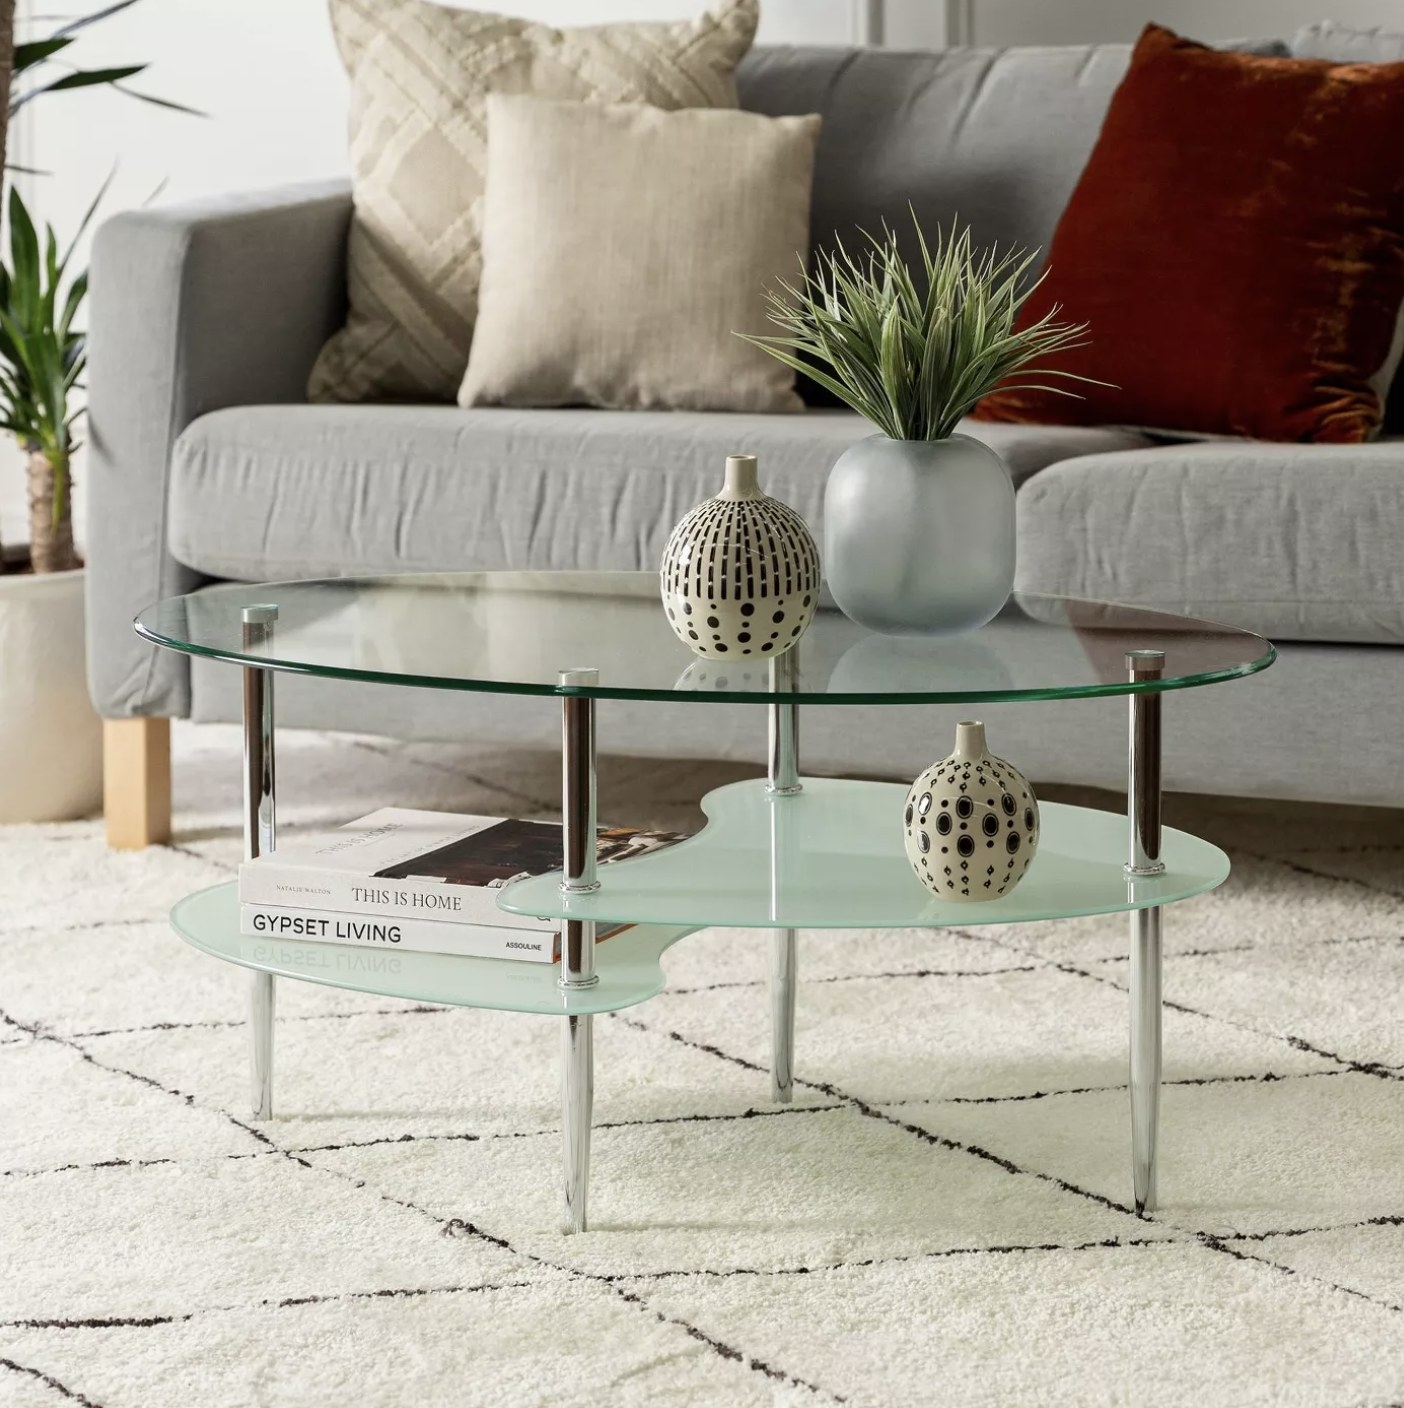 The coffee table in a living room space